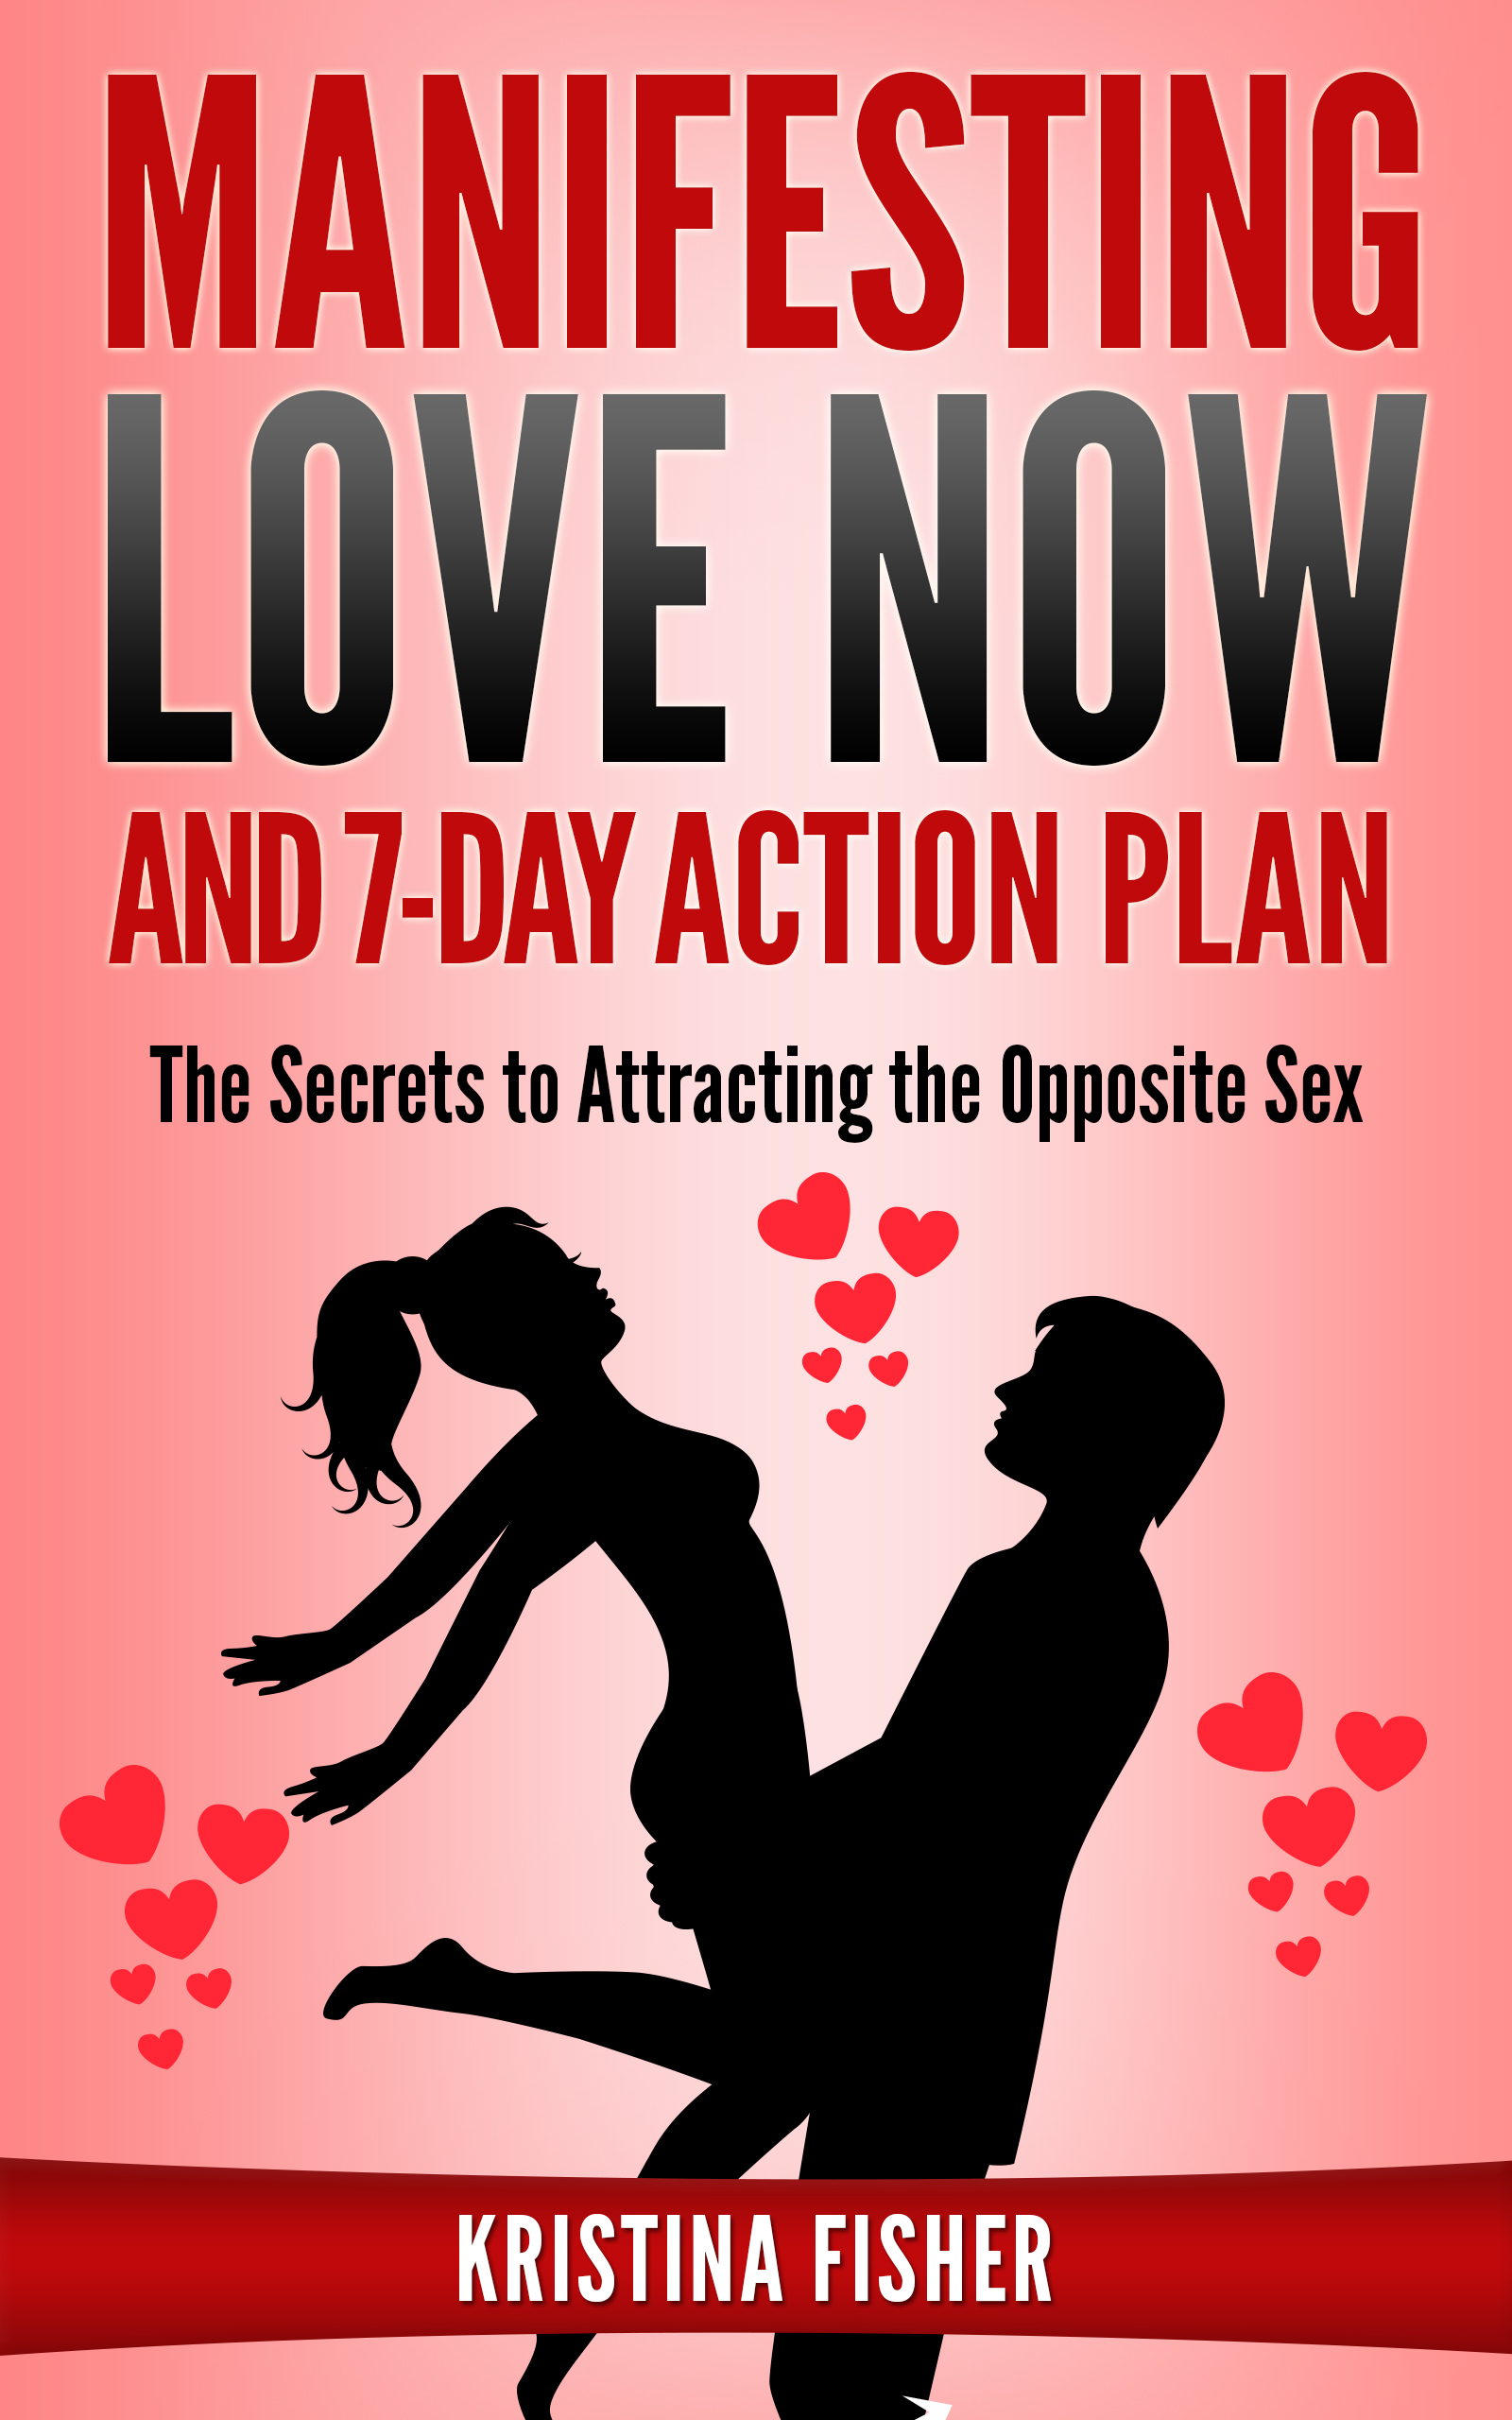 FREE: Manifesting Love Now And 7-Day Action Plan – The Secrets to Attracting the Opposite Sex by Kristina Fisher